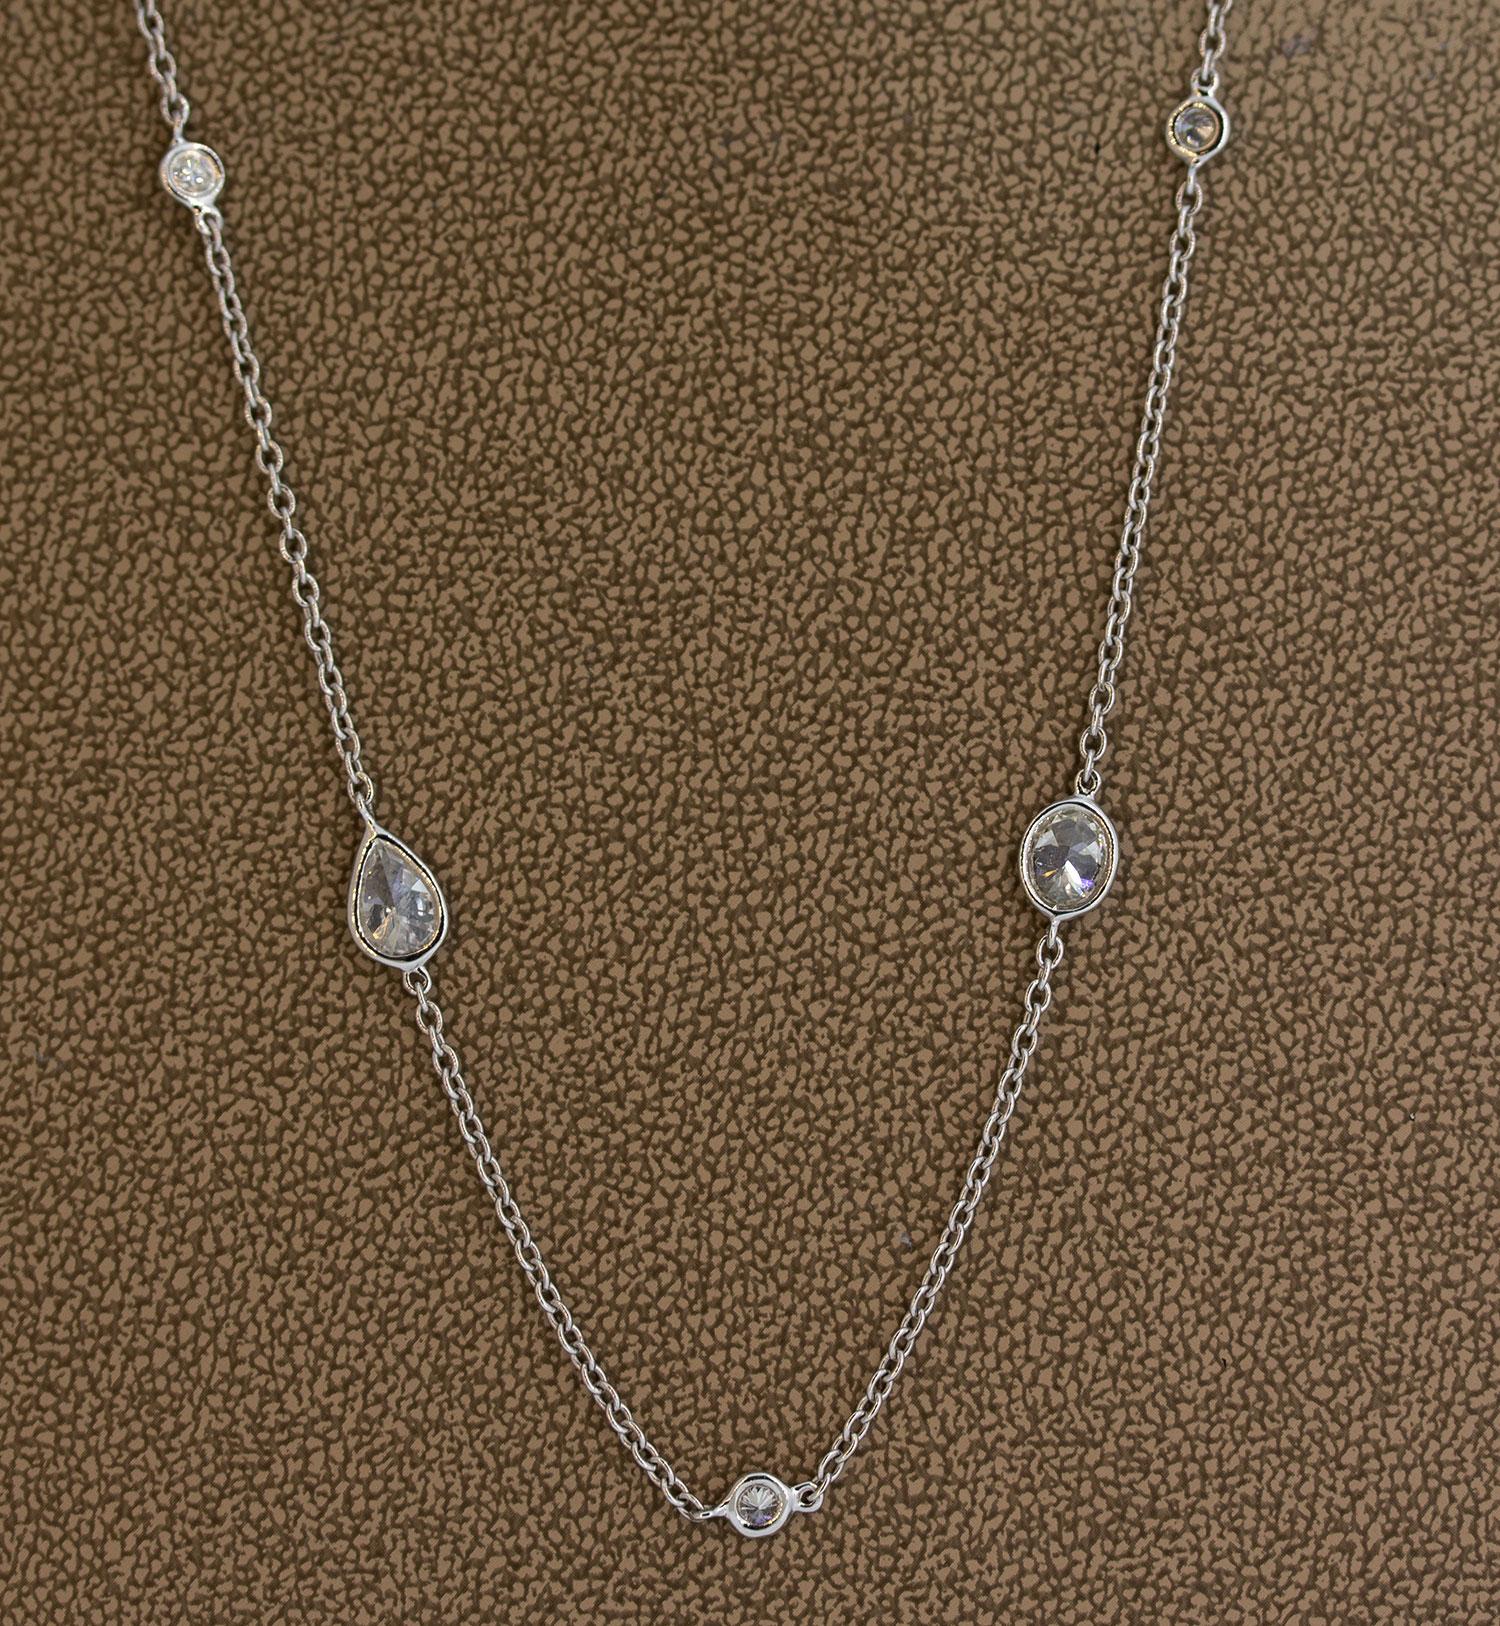 A long ‘diamonds by the yard’ necklace featuring large fancy shaped diamonds. The necklace alternates from smaller round brilliant cut diamonds to larger fancy shapes which include ovals, marquise and pear shaped diamonds. In total they weigh 6.74